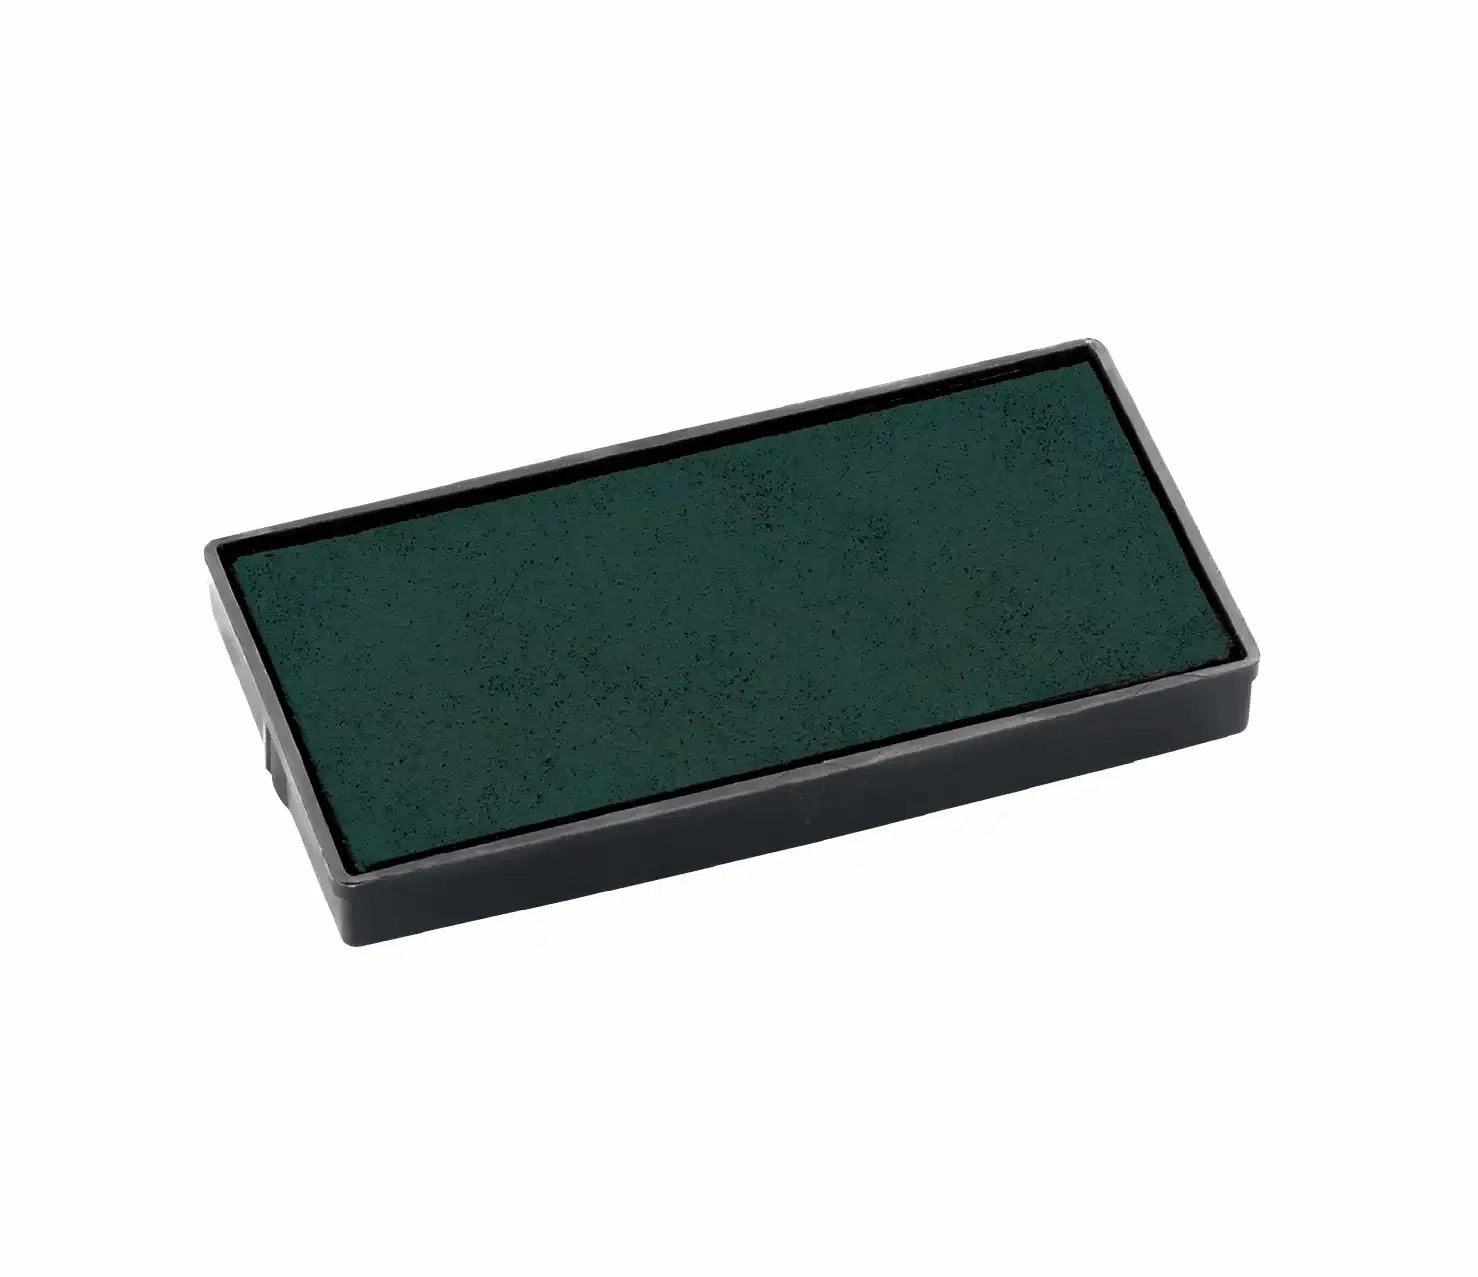 Refill Ink Tray for Colop P40 With Green Ink